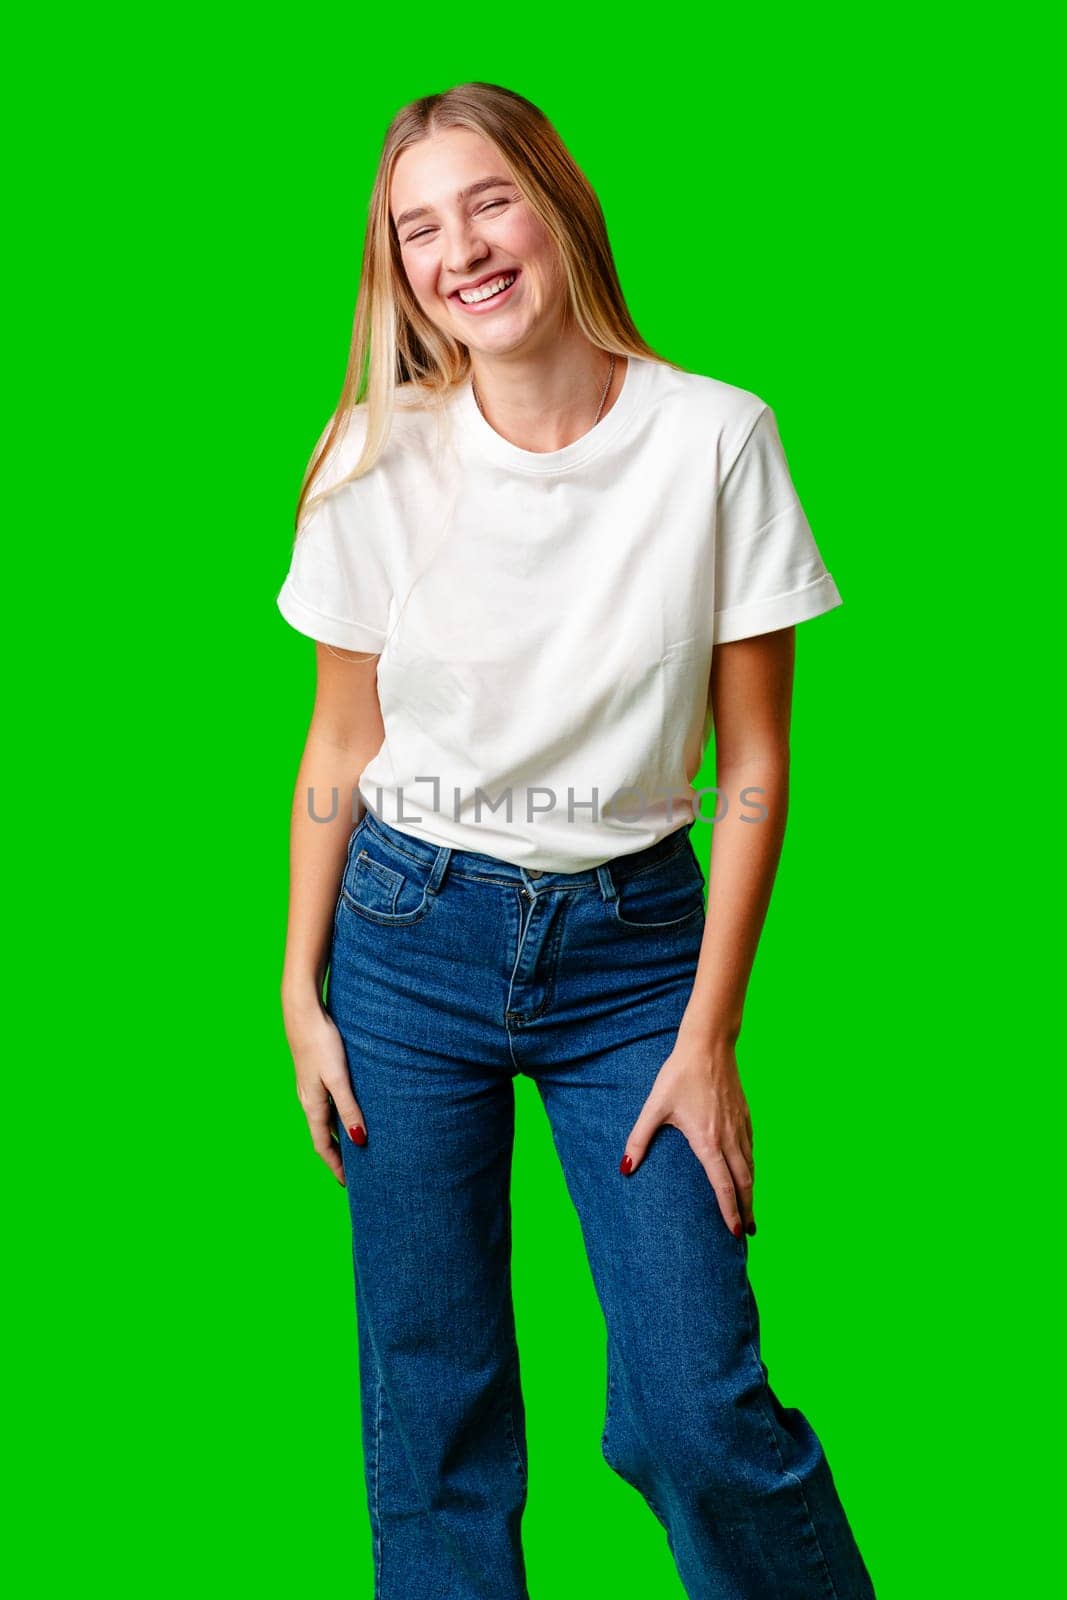 Young Woman Poses for Picture against green background in studio